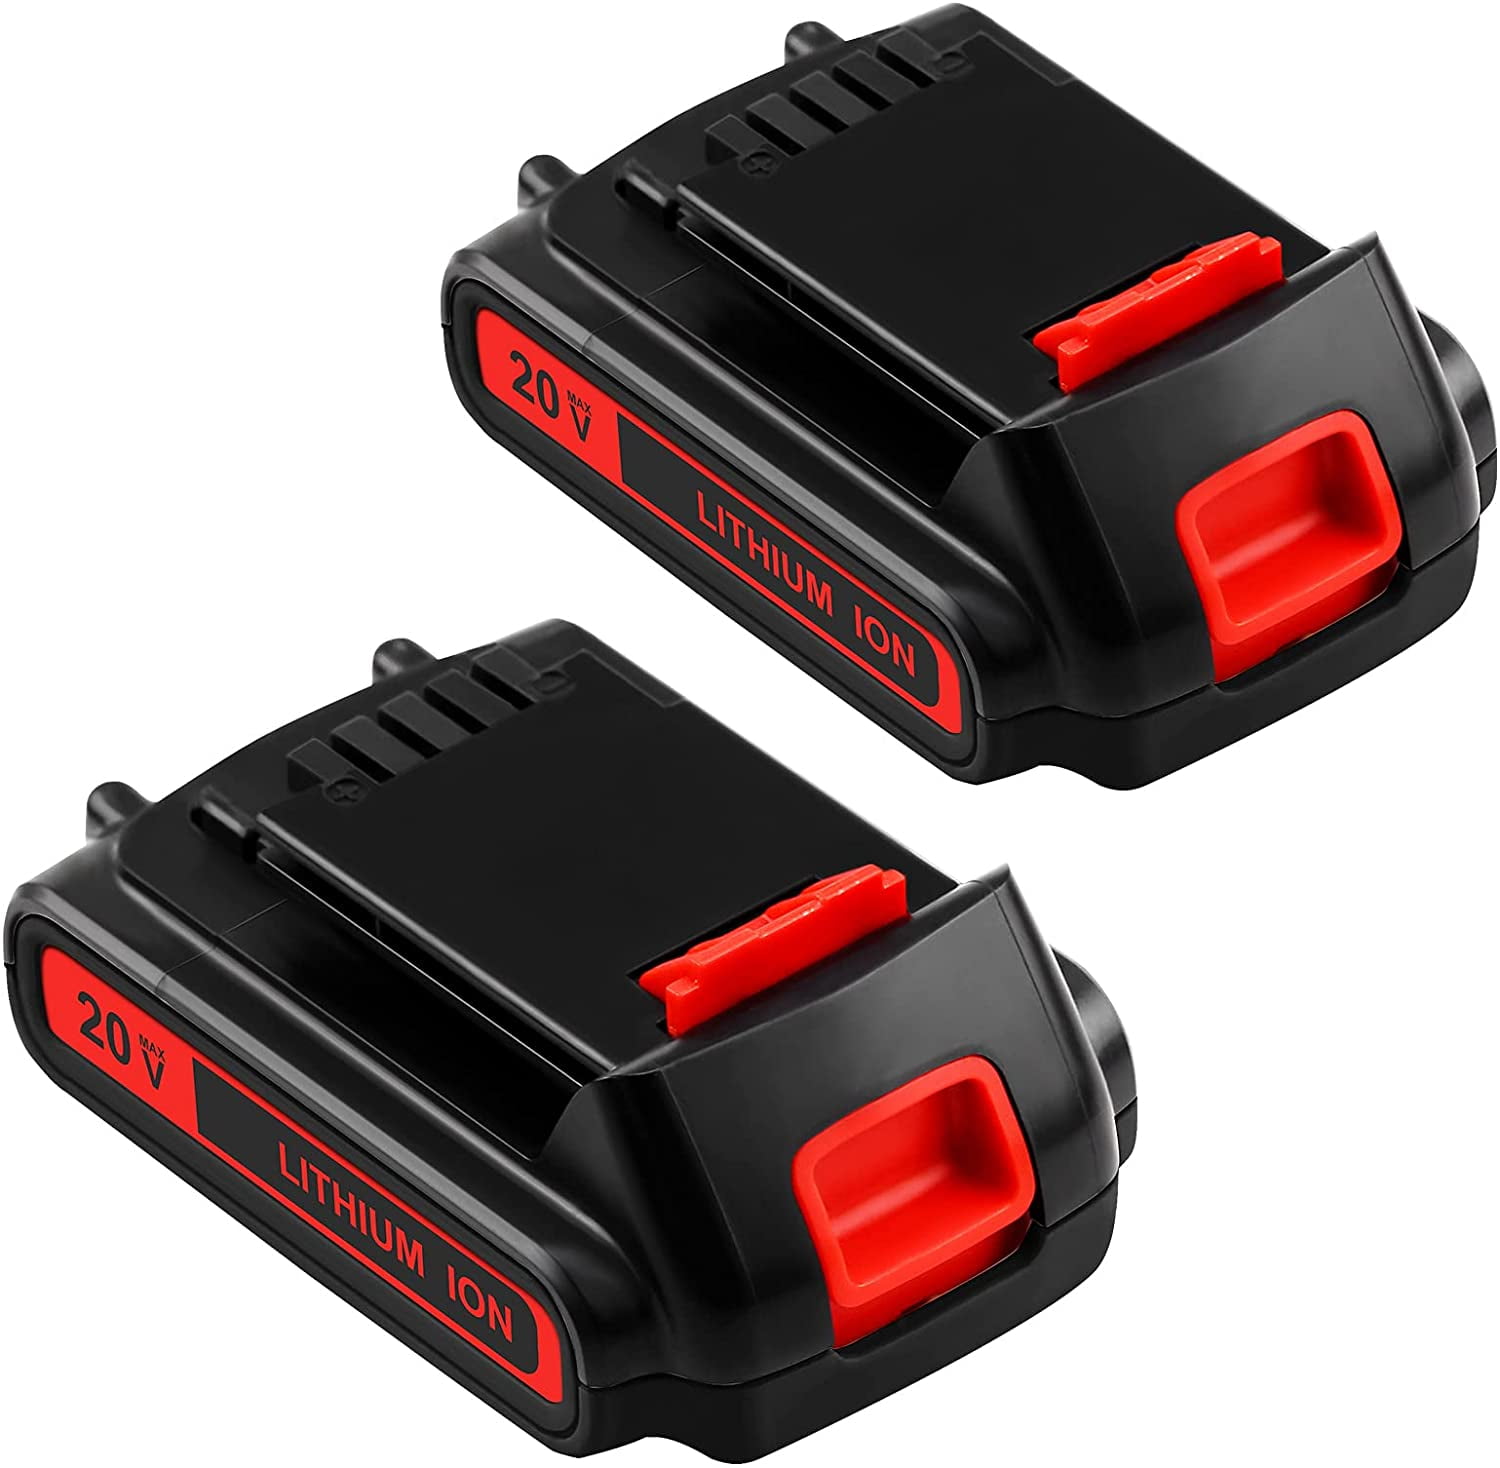  3500mAh LBXR20 Battery for Black and Decker 20V Battery  Replacement 20Volt Max Lithium-ion LB20 LBXR20 LBXR2020 20V Lithium-ion  Weed Eater Trimmer Cordless Tool Battery 2Pack Just for Black and Decker 